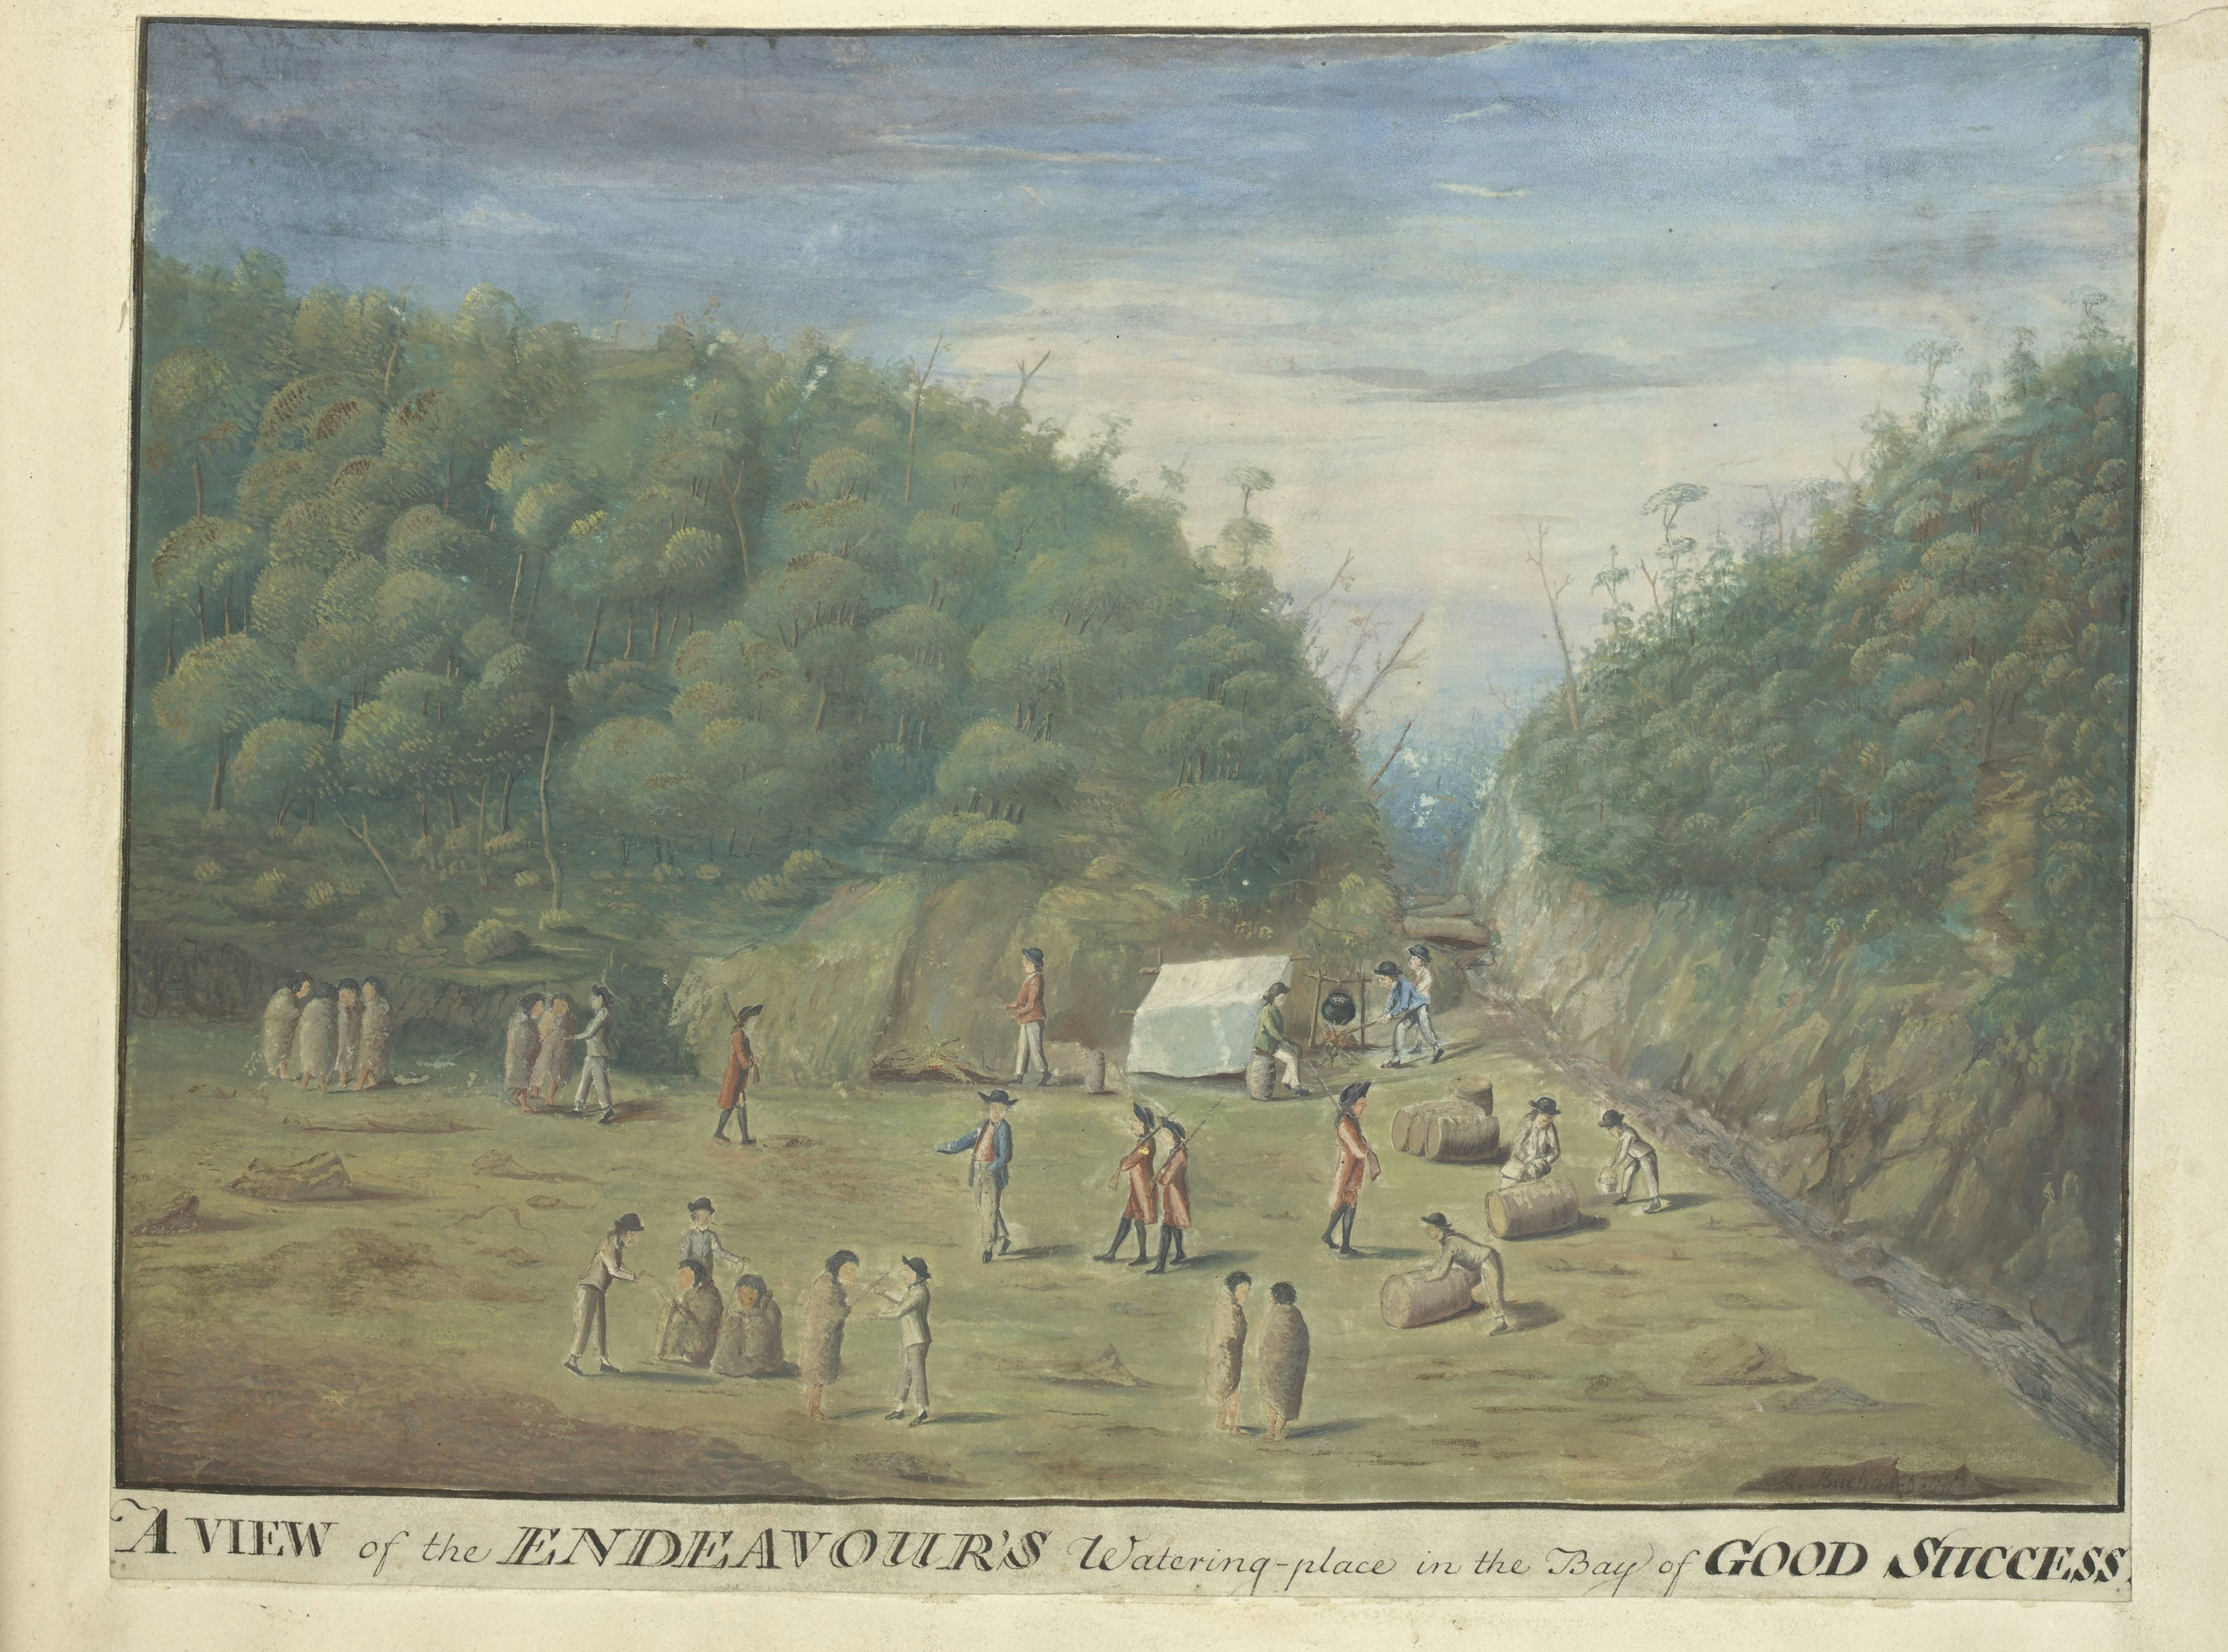 Travel News - 'A View of the Endeavour’s Watering Place in the Bay of Good Success’ by Alexander Buchan, 1769